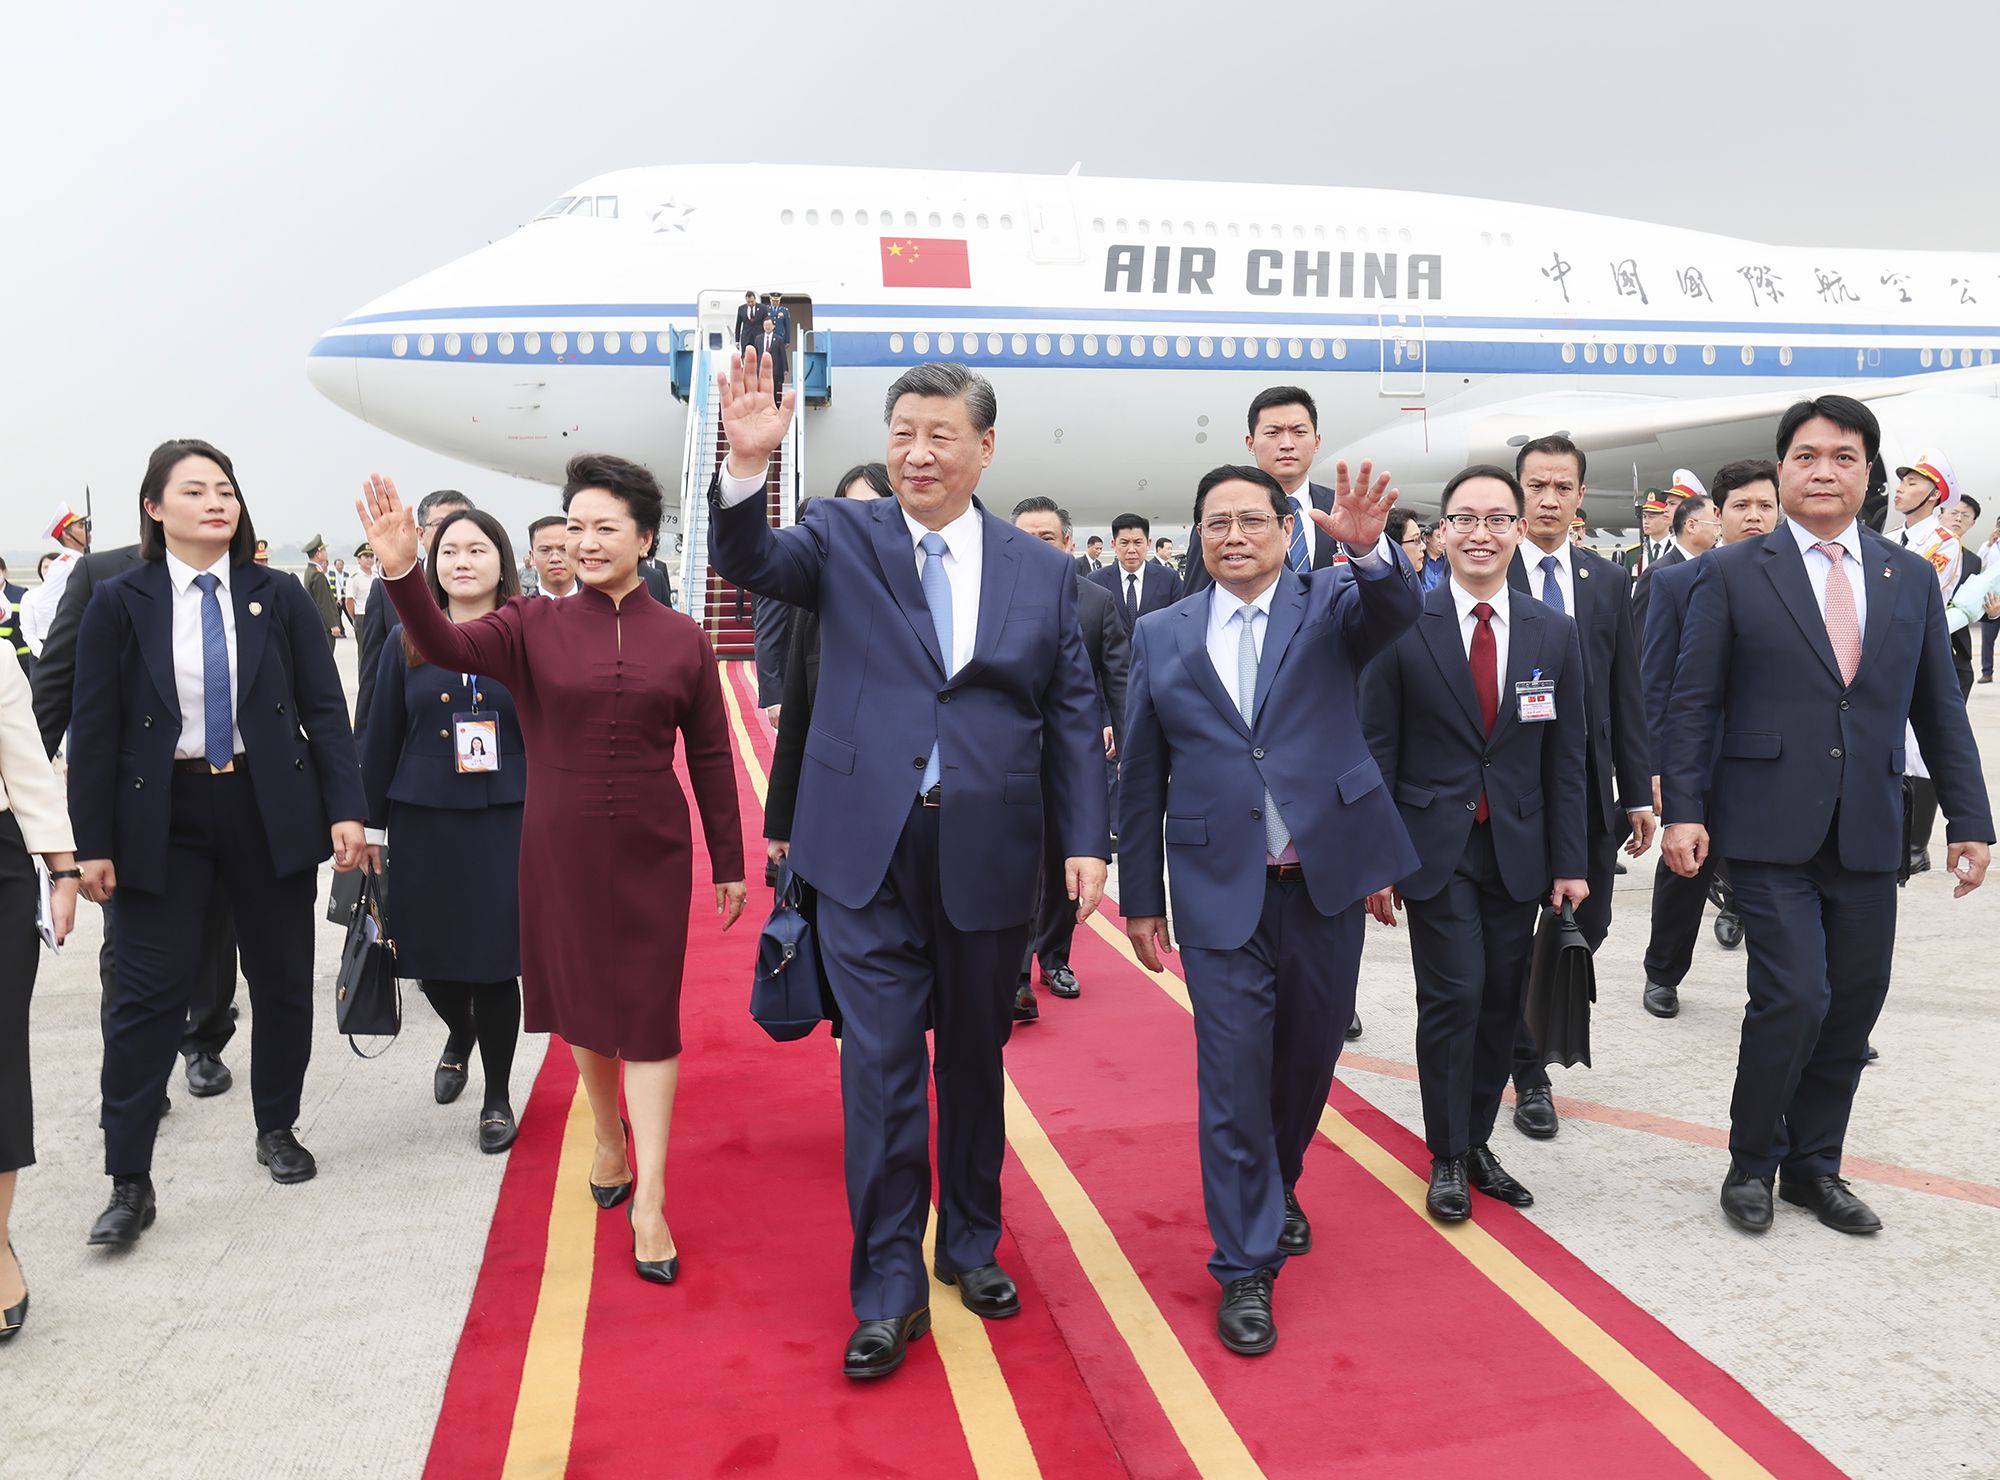 Xi Jinping, general secretary of the Communist Party of China Central Committee and Chinese president, arrives in Hanoi, capital of Vietnam on December 12, 2023, for a state visit at the invitation of General Secretary of the Central Committee of the Communist Party of Vietnam Nguyen Phu Trong and Vietnamese President Vo Van Thuong. Photo: Xinhua